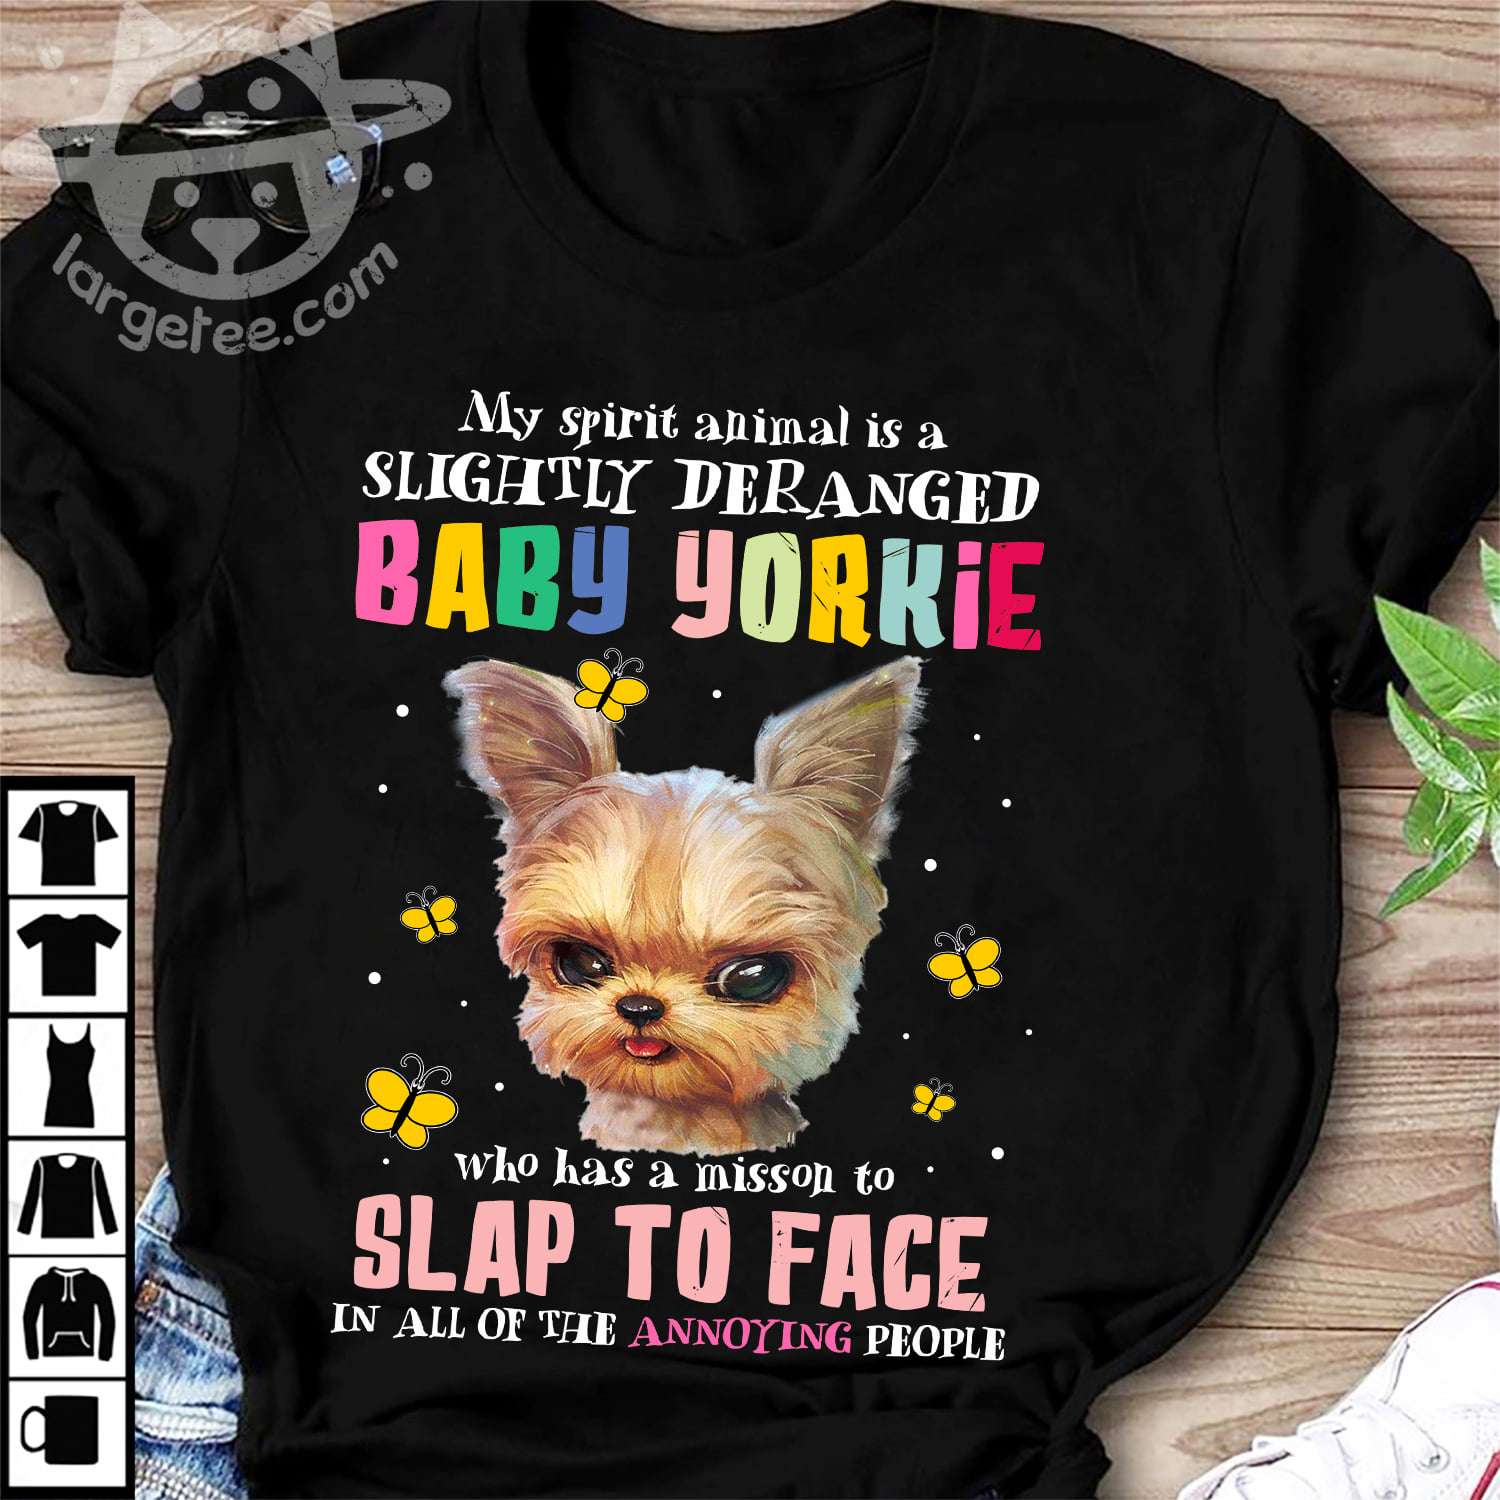 Baby Yorkie - My spirit is a slightly deranged baby yorkie who has a mission to salp to face